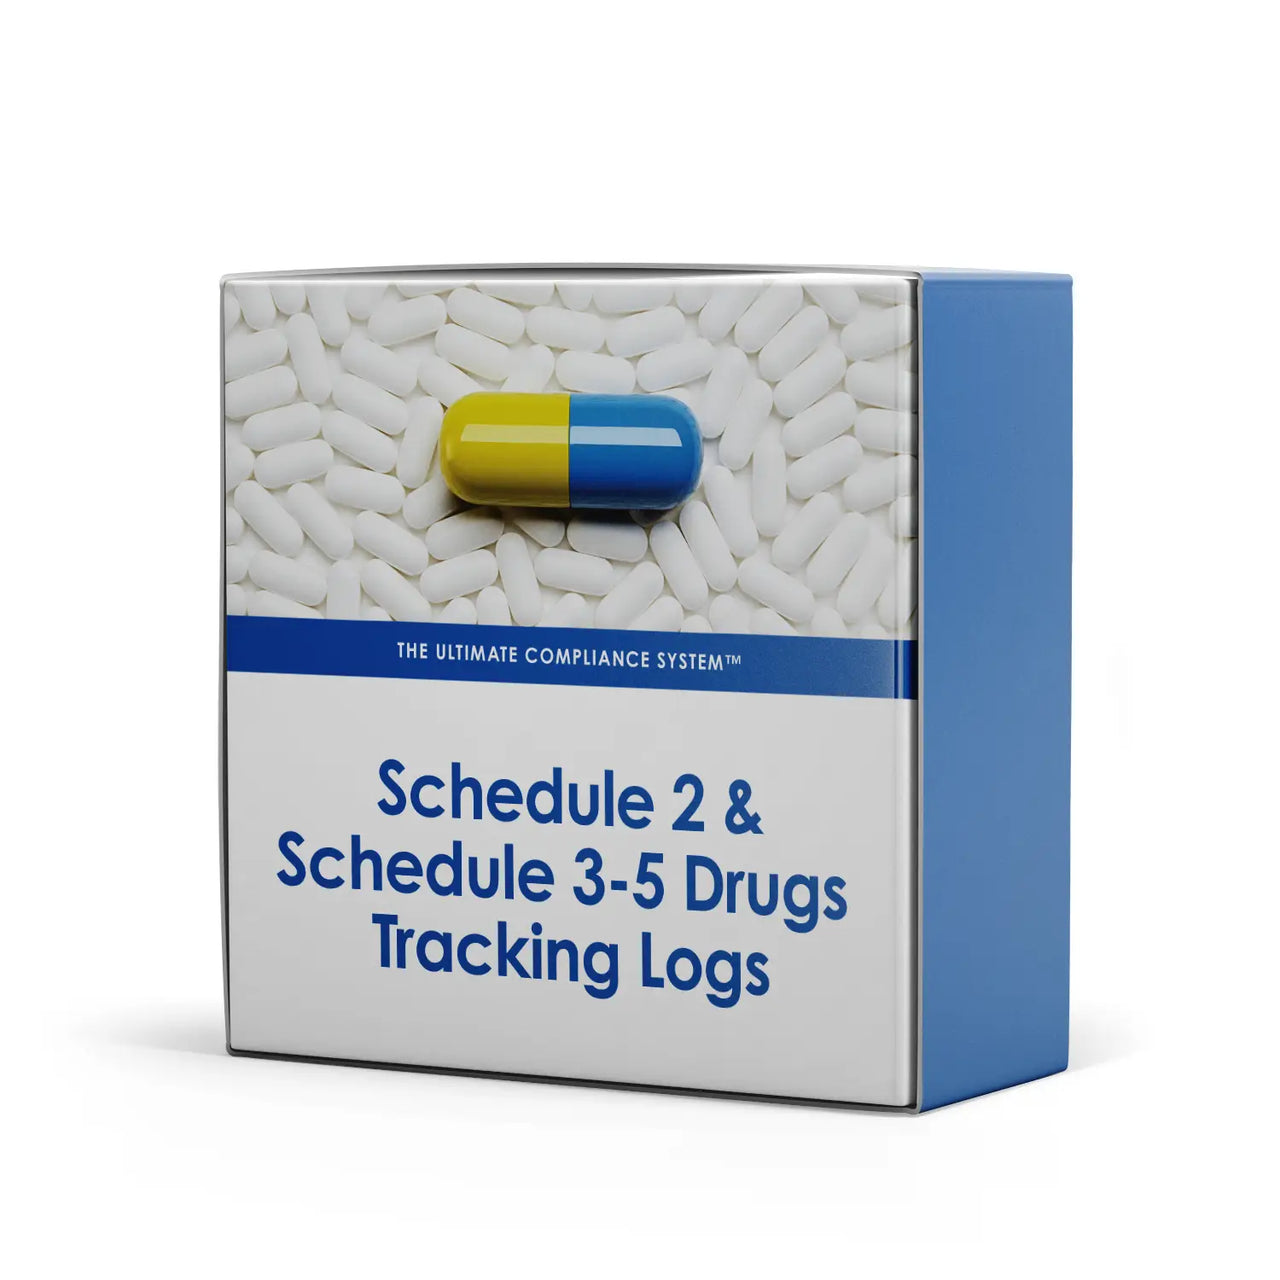 DEA Controlled Substance Drug Tracking Logs - Schedule 2 and 3, 4 & 5 - FULL SET